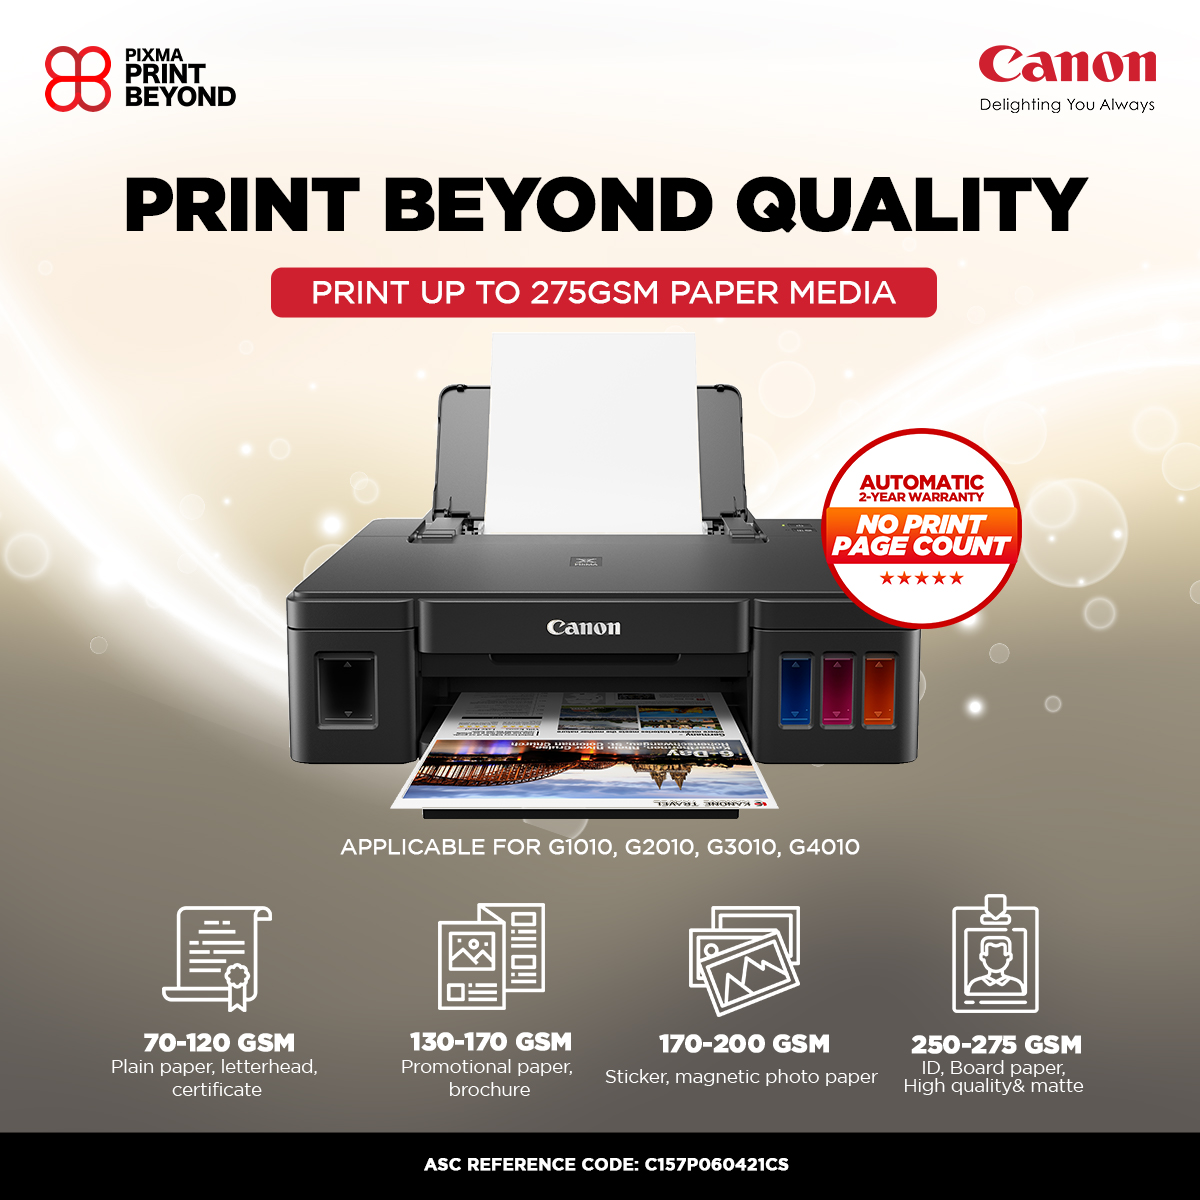 Features of Canon printer